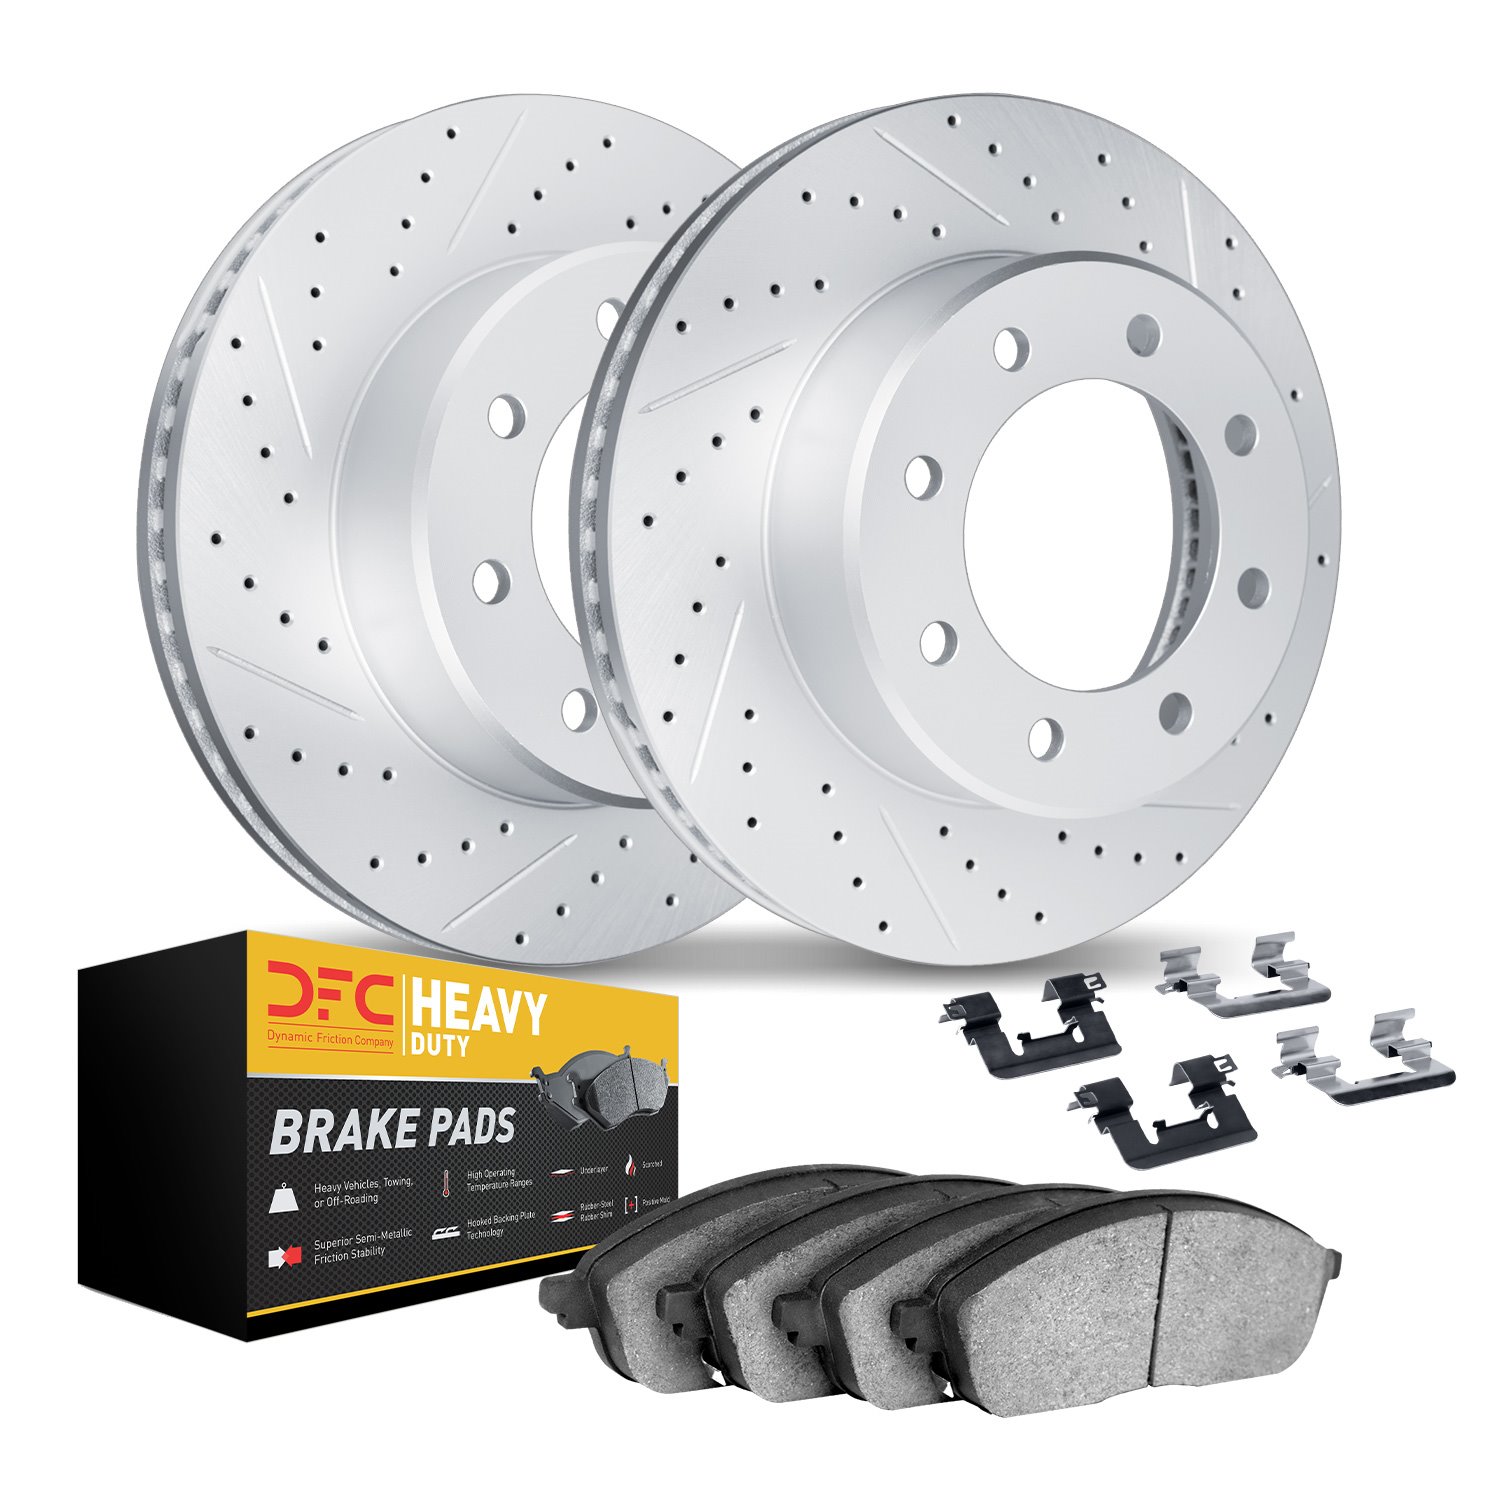 2212-99150 Geoperformance Drilled/Slotted Rotors w/Heavy-Duty Pads Kit & Hardware, 2005-2012 Ford/Lincoln/Mercury/Mazda, Positio